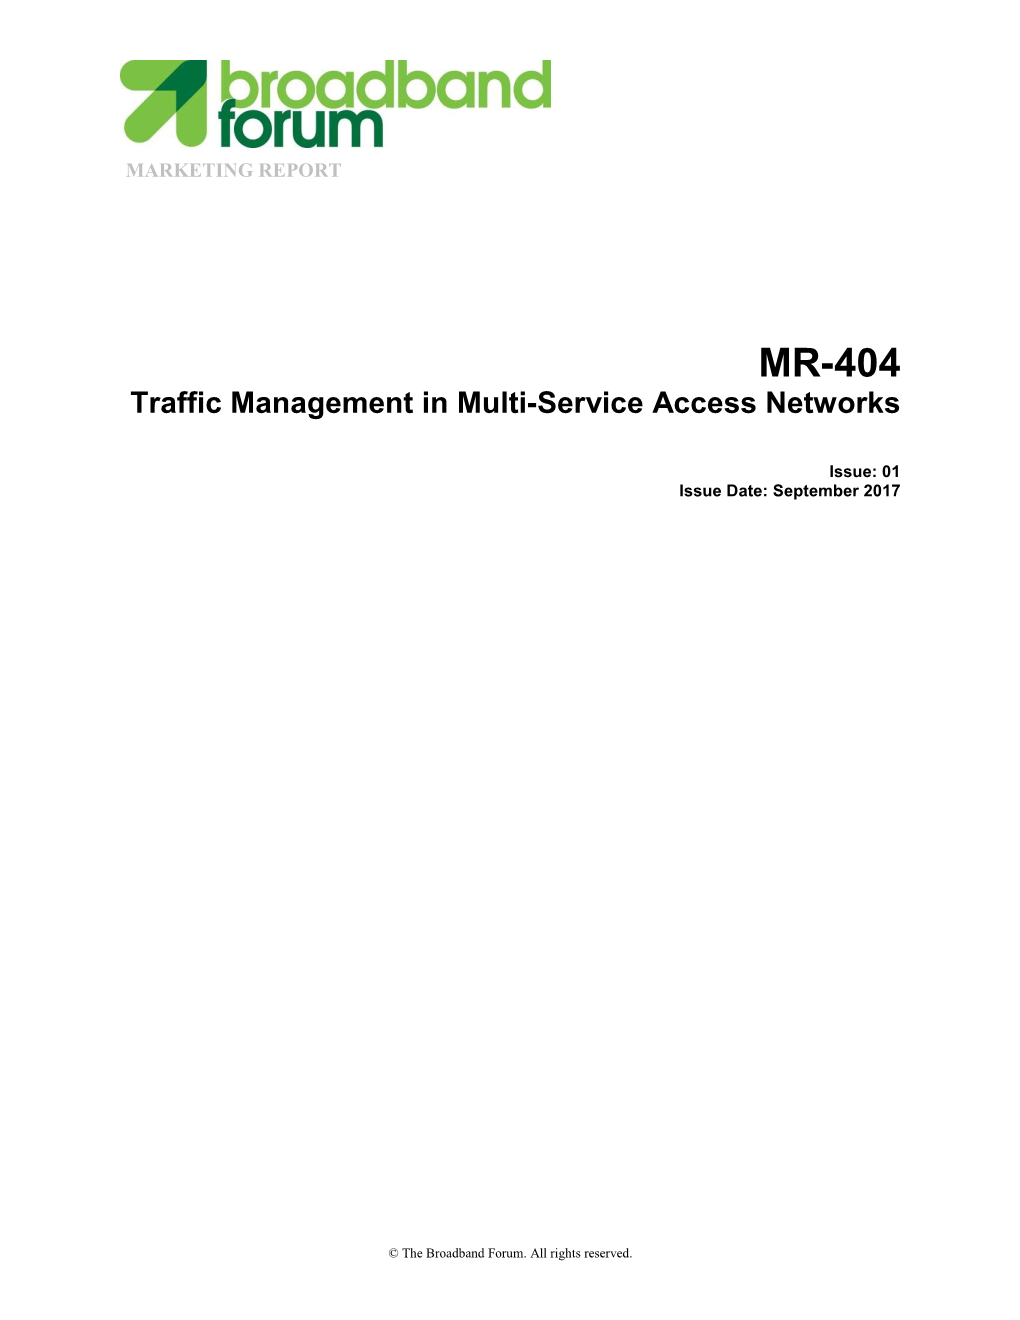 Traffic Management in Multi-Service Access Networks